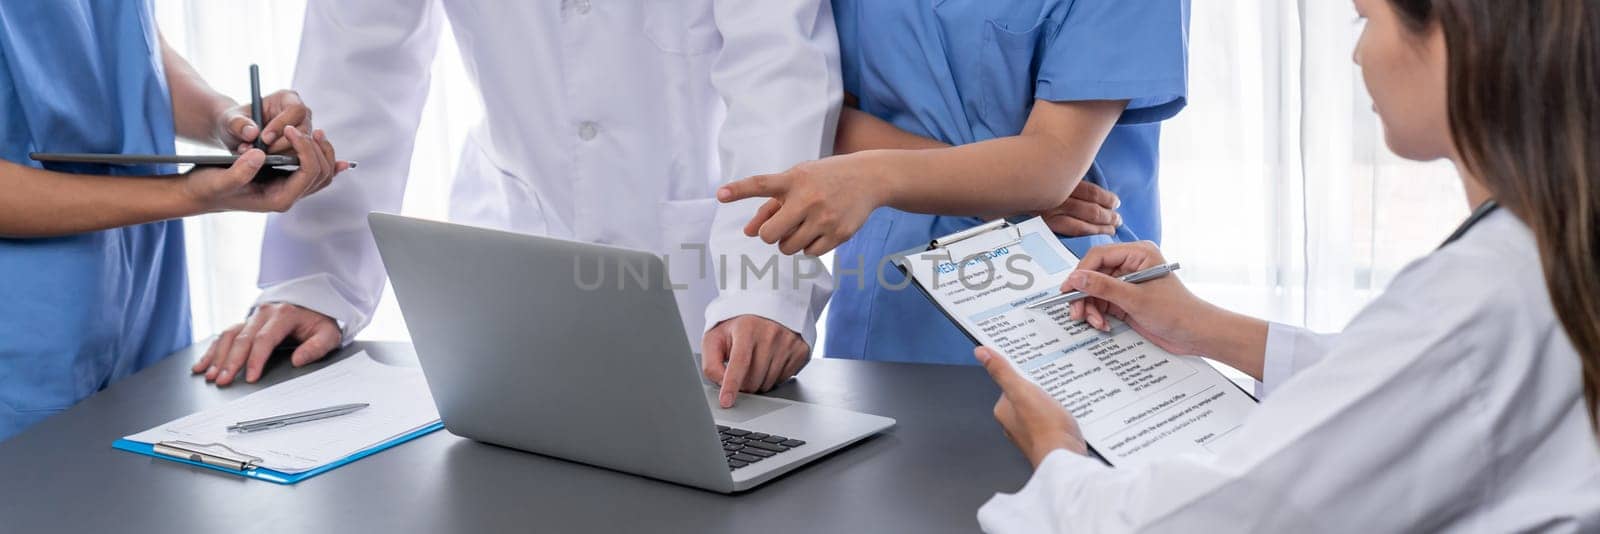 Doctor and nurse in medical meeting discussing strategic medical treatment plan together with report and laptop. Medical school workshop training concept in panoramic banner. Neoteric